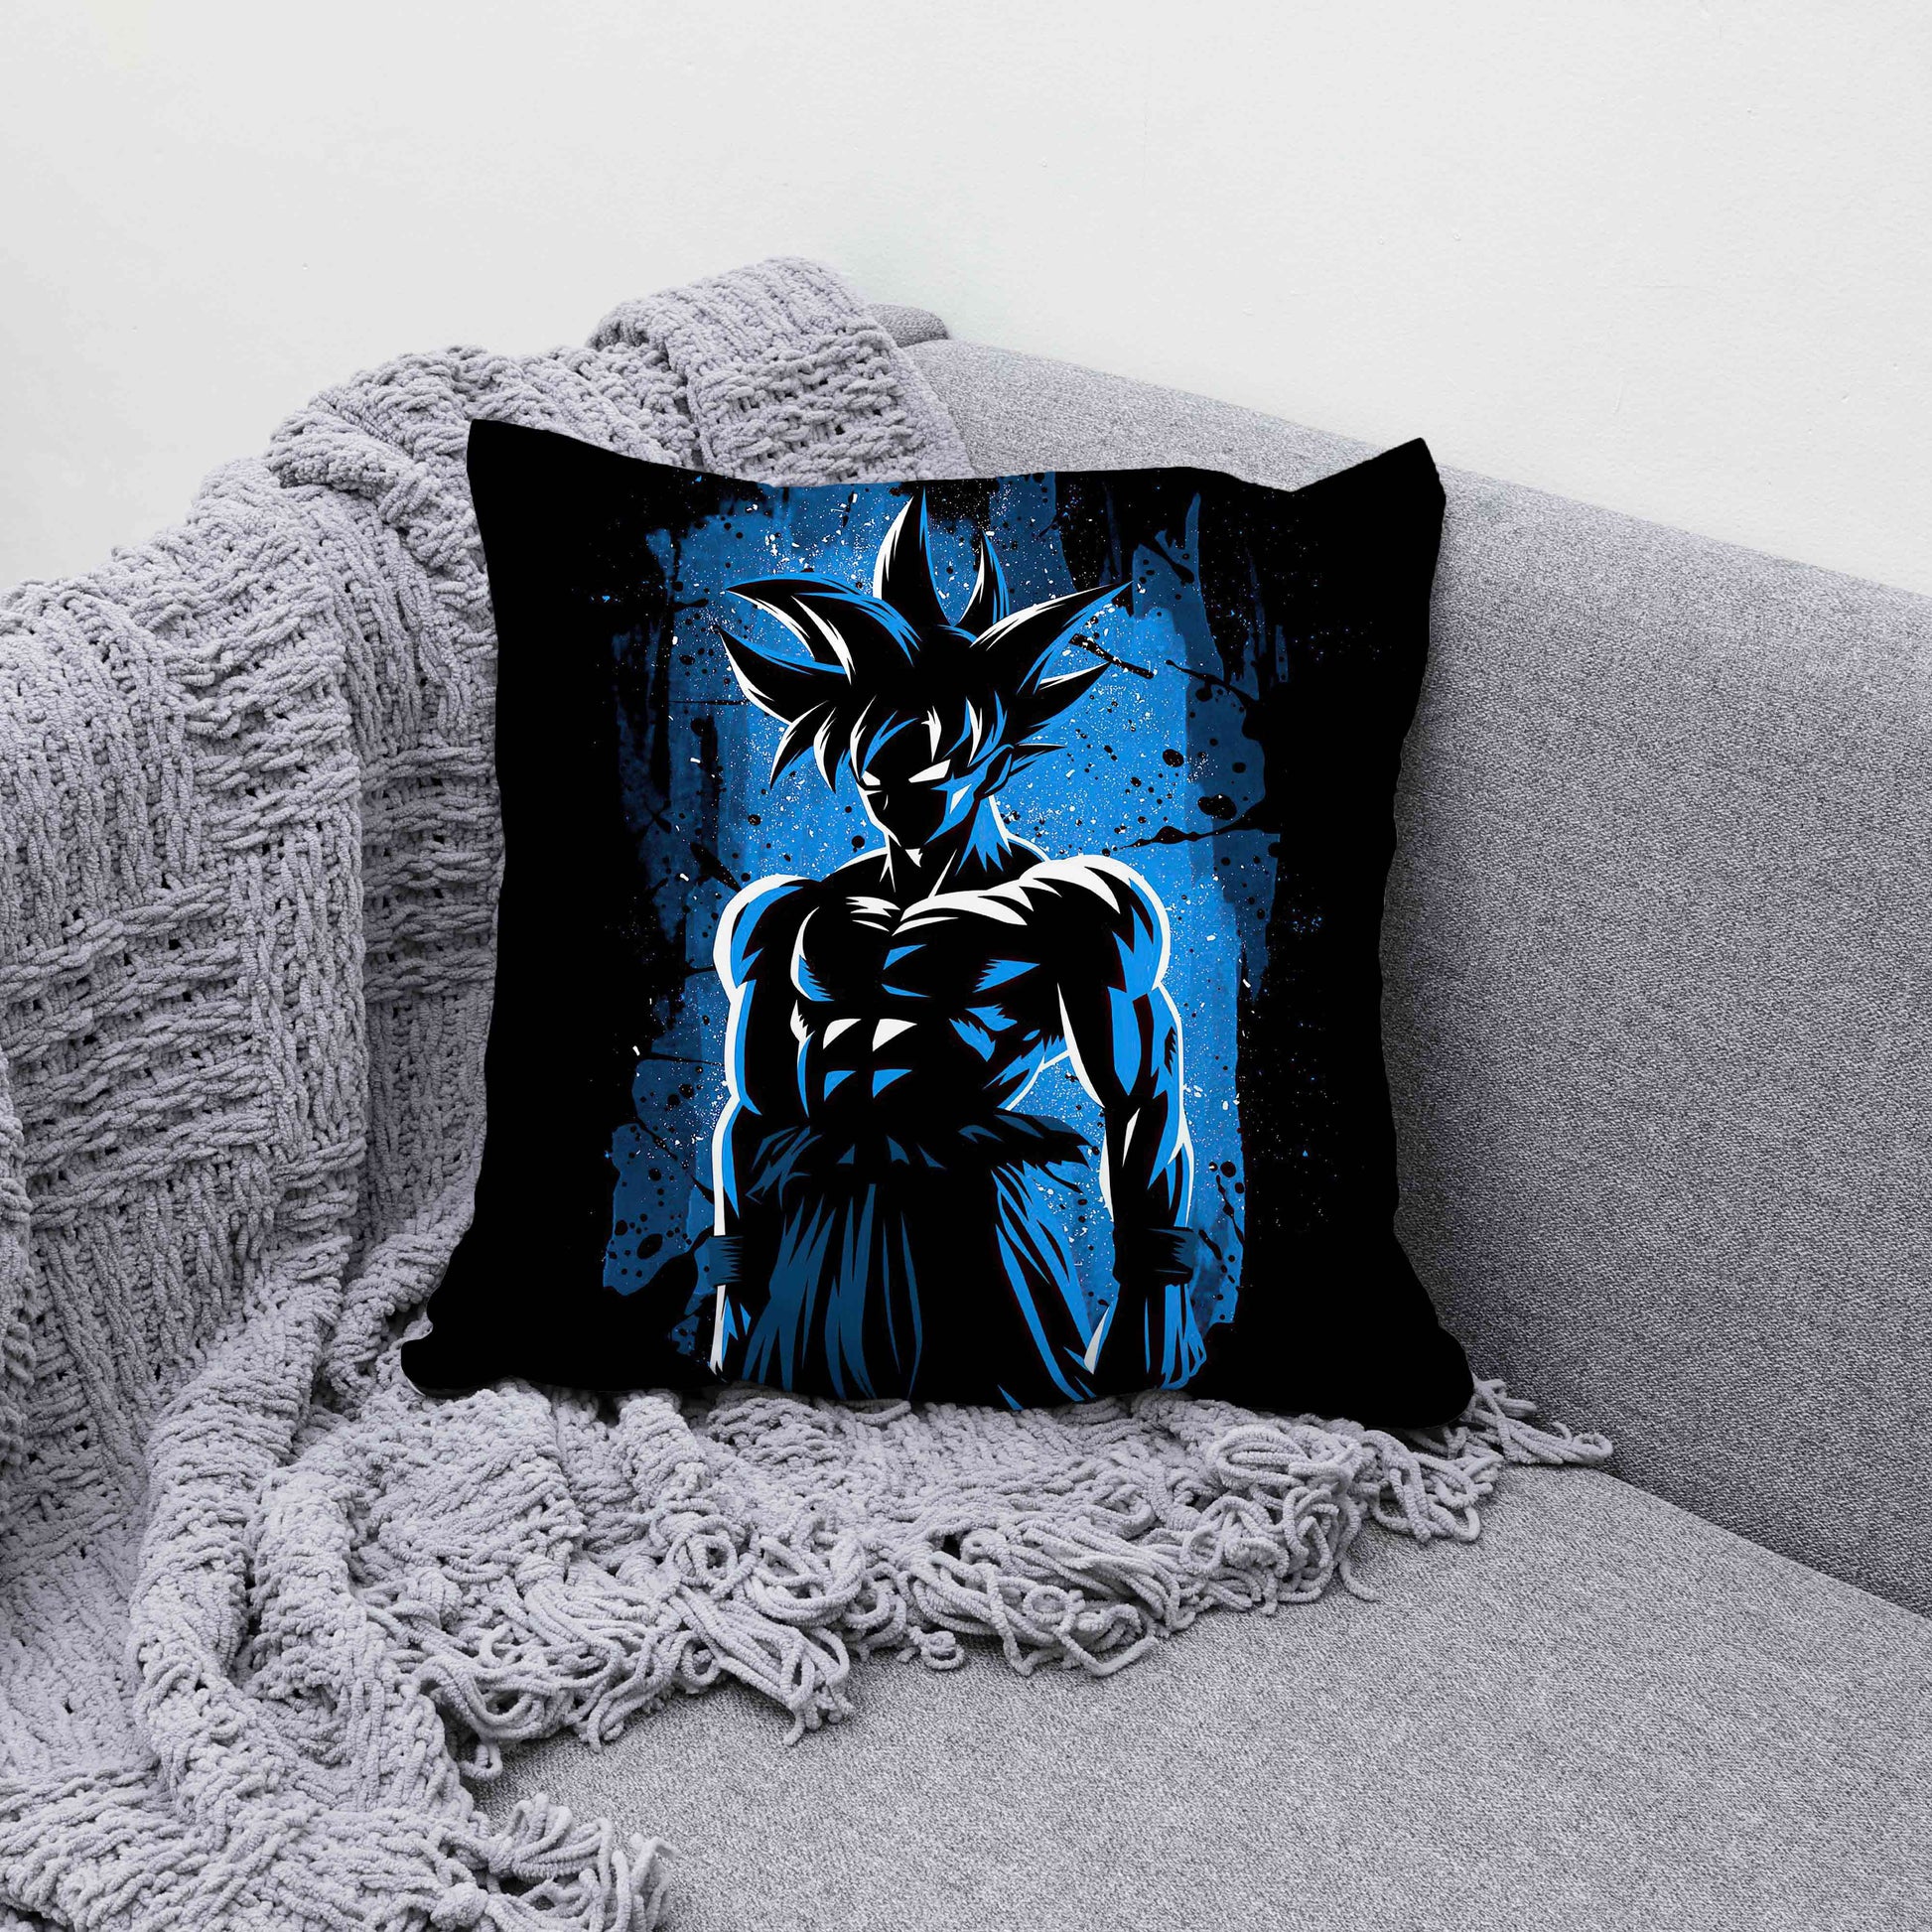 Goku Extreme Power Cushion Cover trendy home